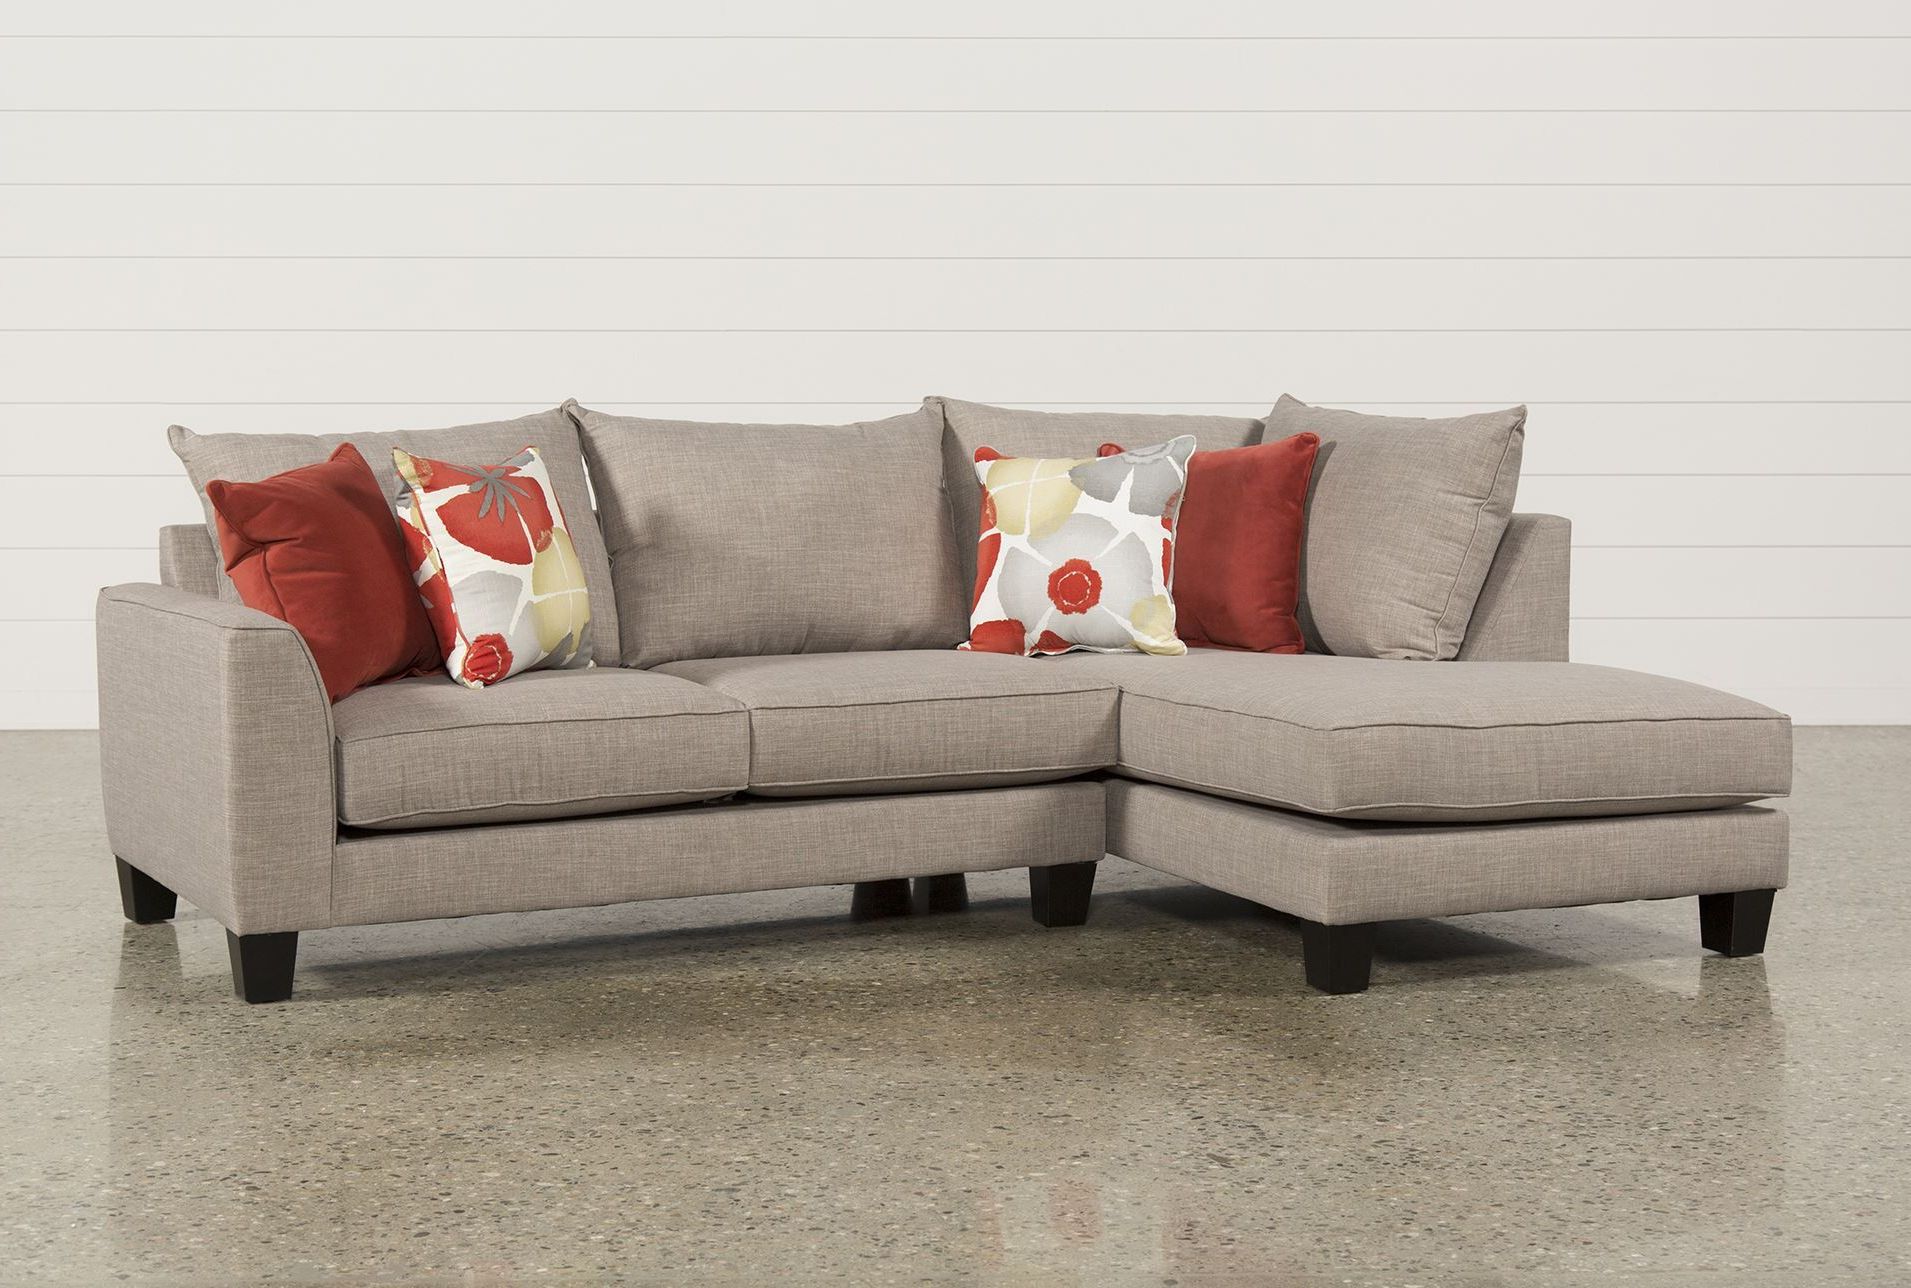 Ideas Of Laf Chaise On Kerri 2 Piece Sectional W Laf Chaise Living Pertaining To Most Recently Released Kerri 2 Piece Sectionals With Laf Chaise (View 7 of 20)